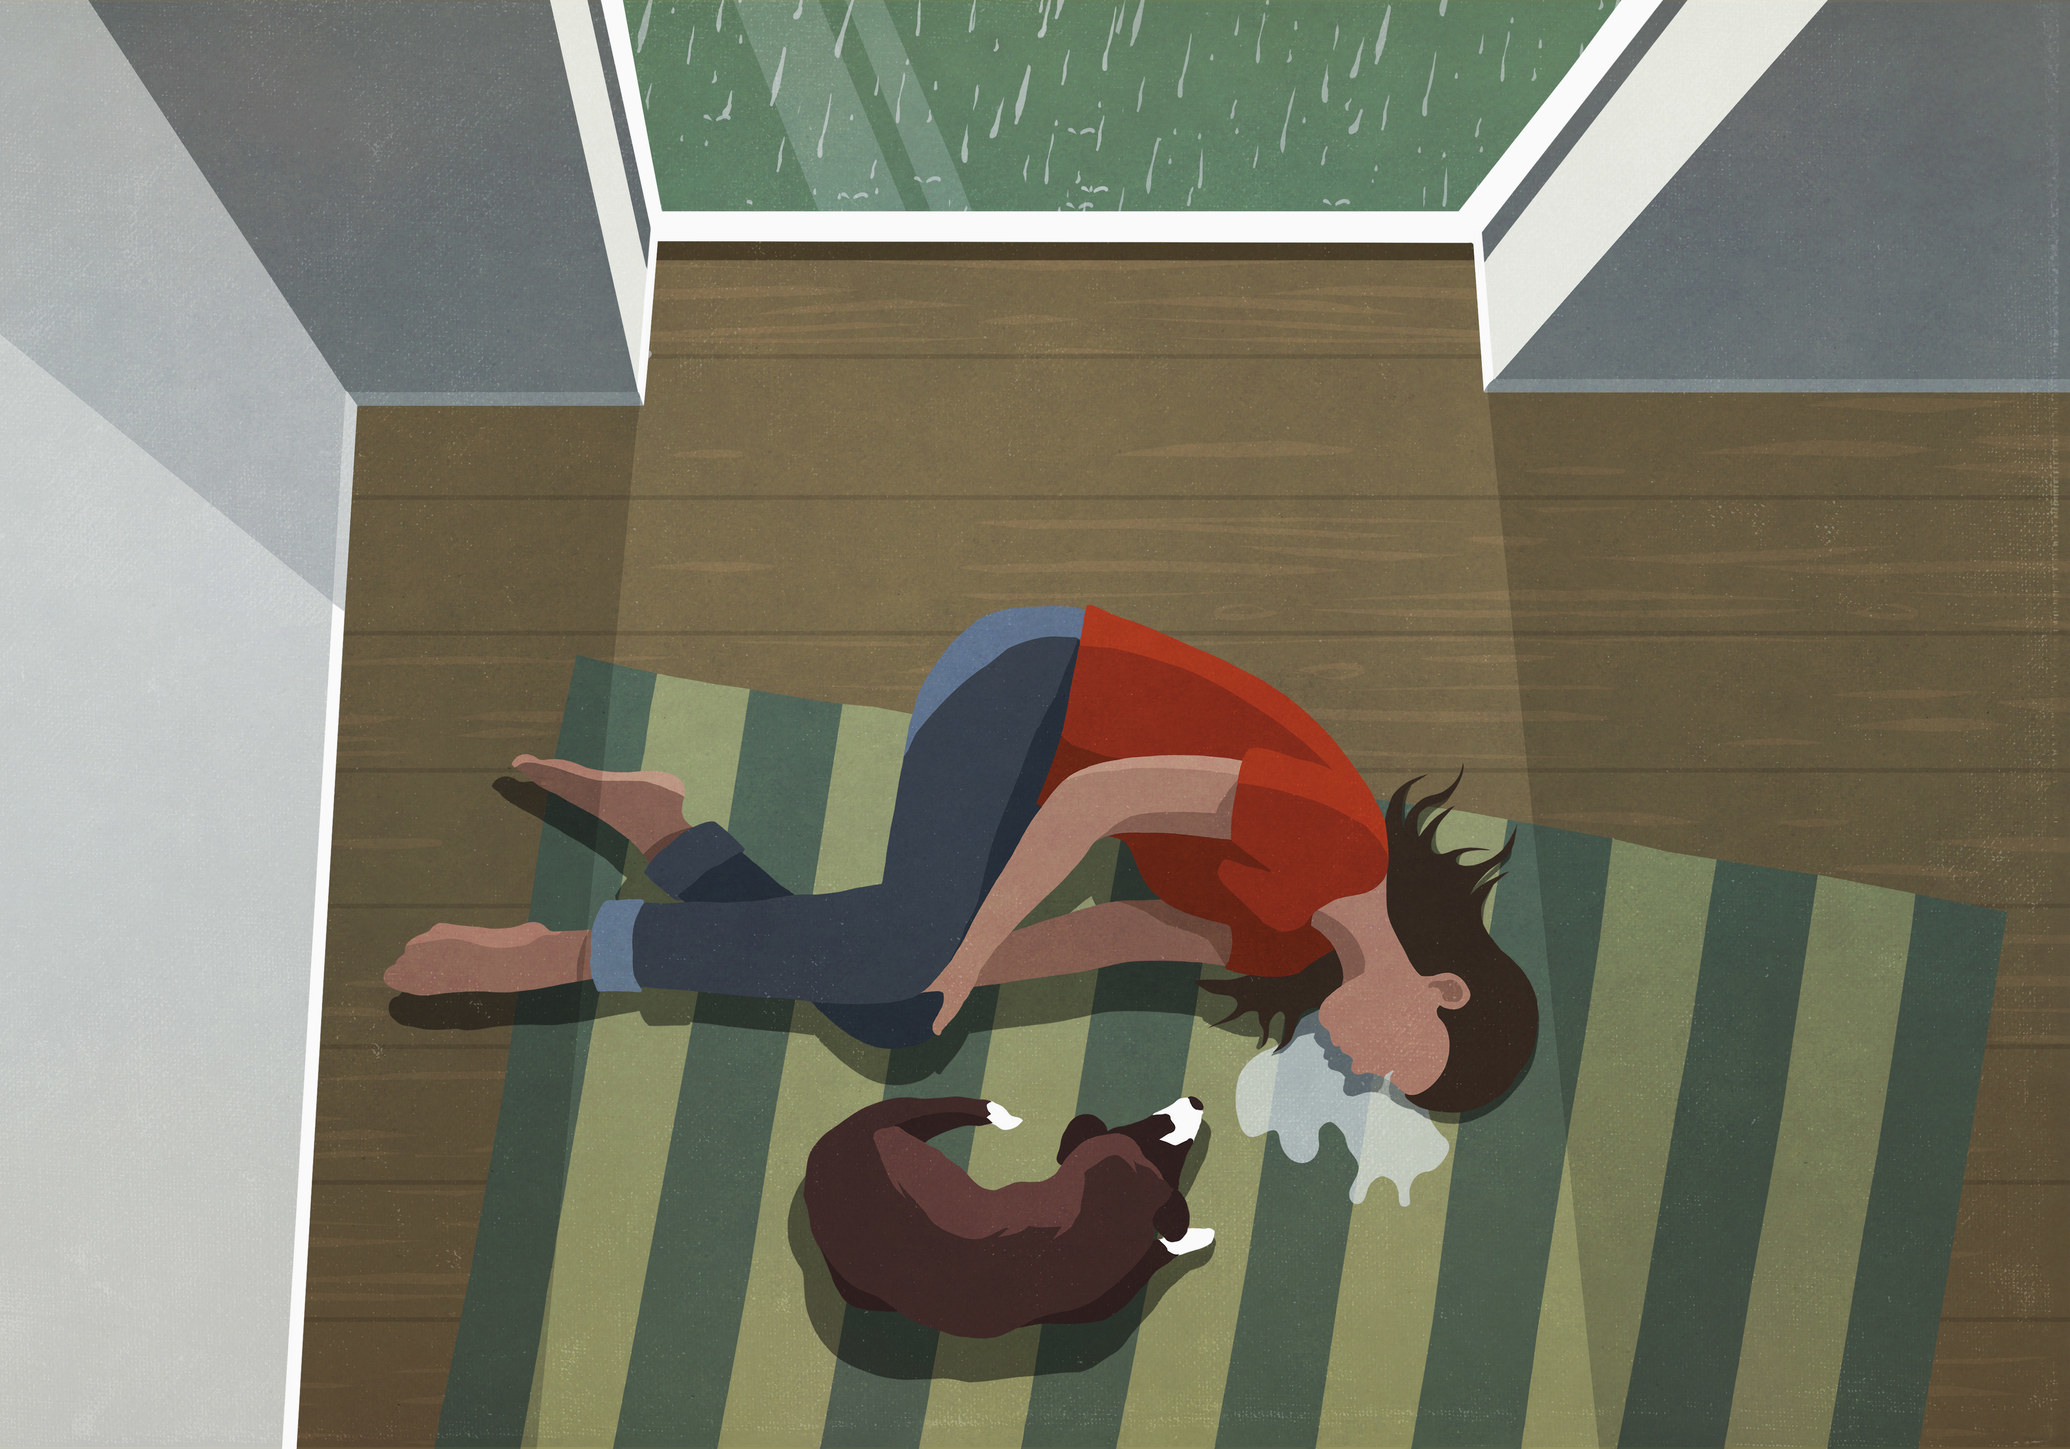 An illustration of a person lying on the ground crying next to a dog in a room as it rains outside